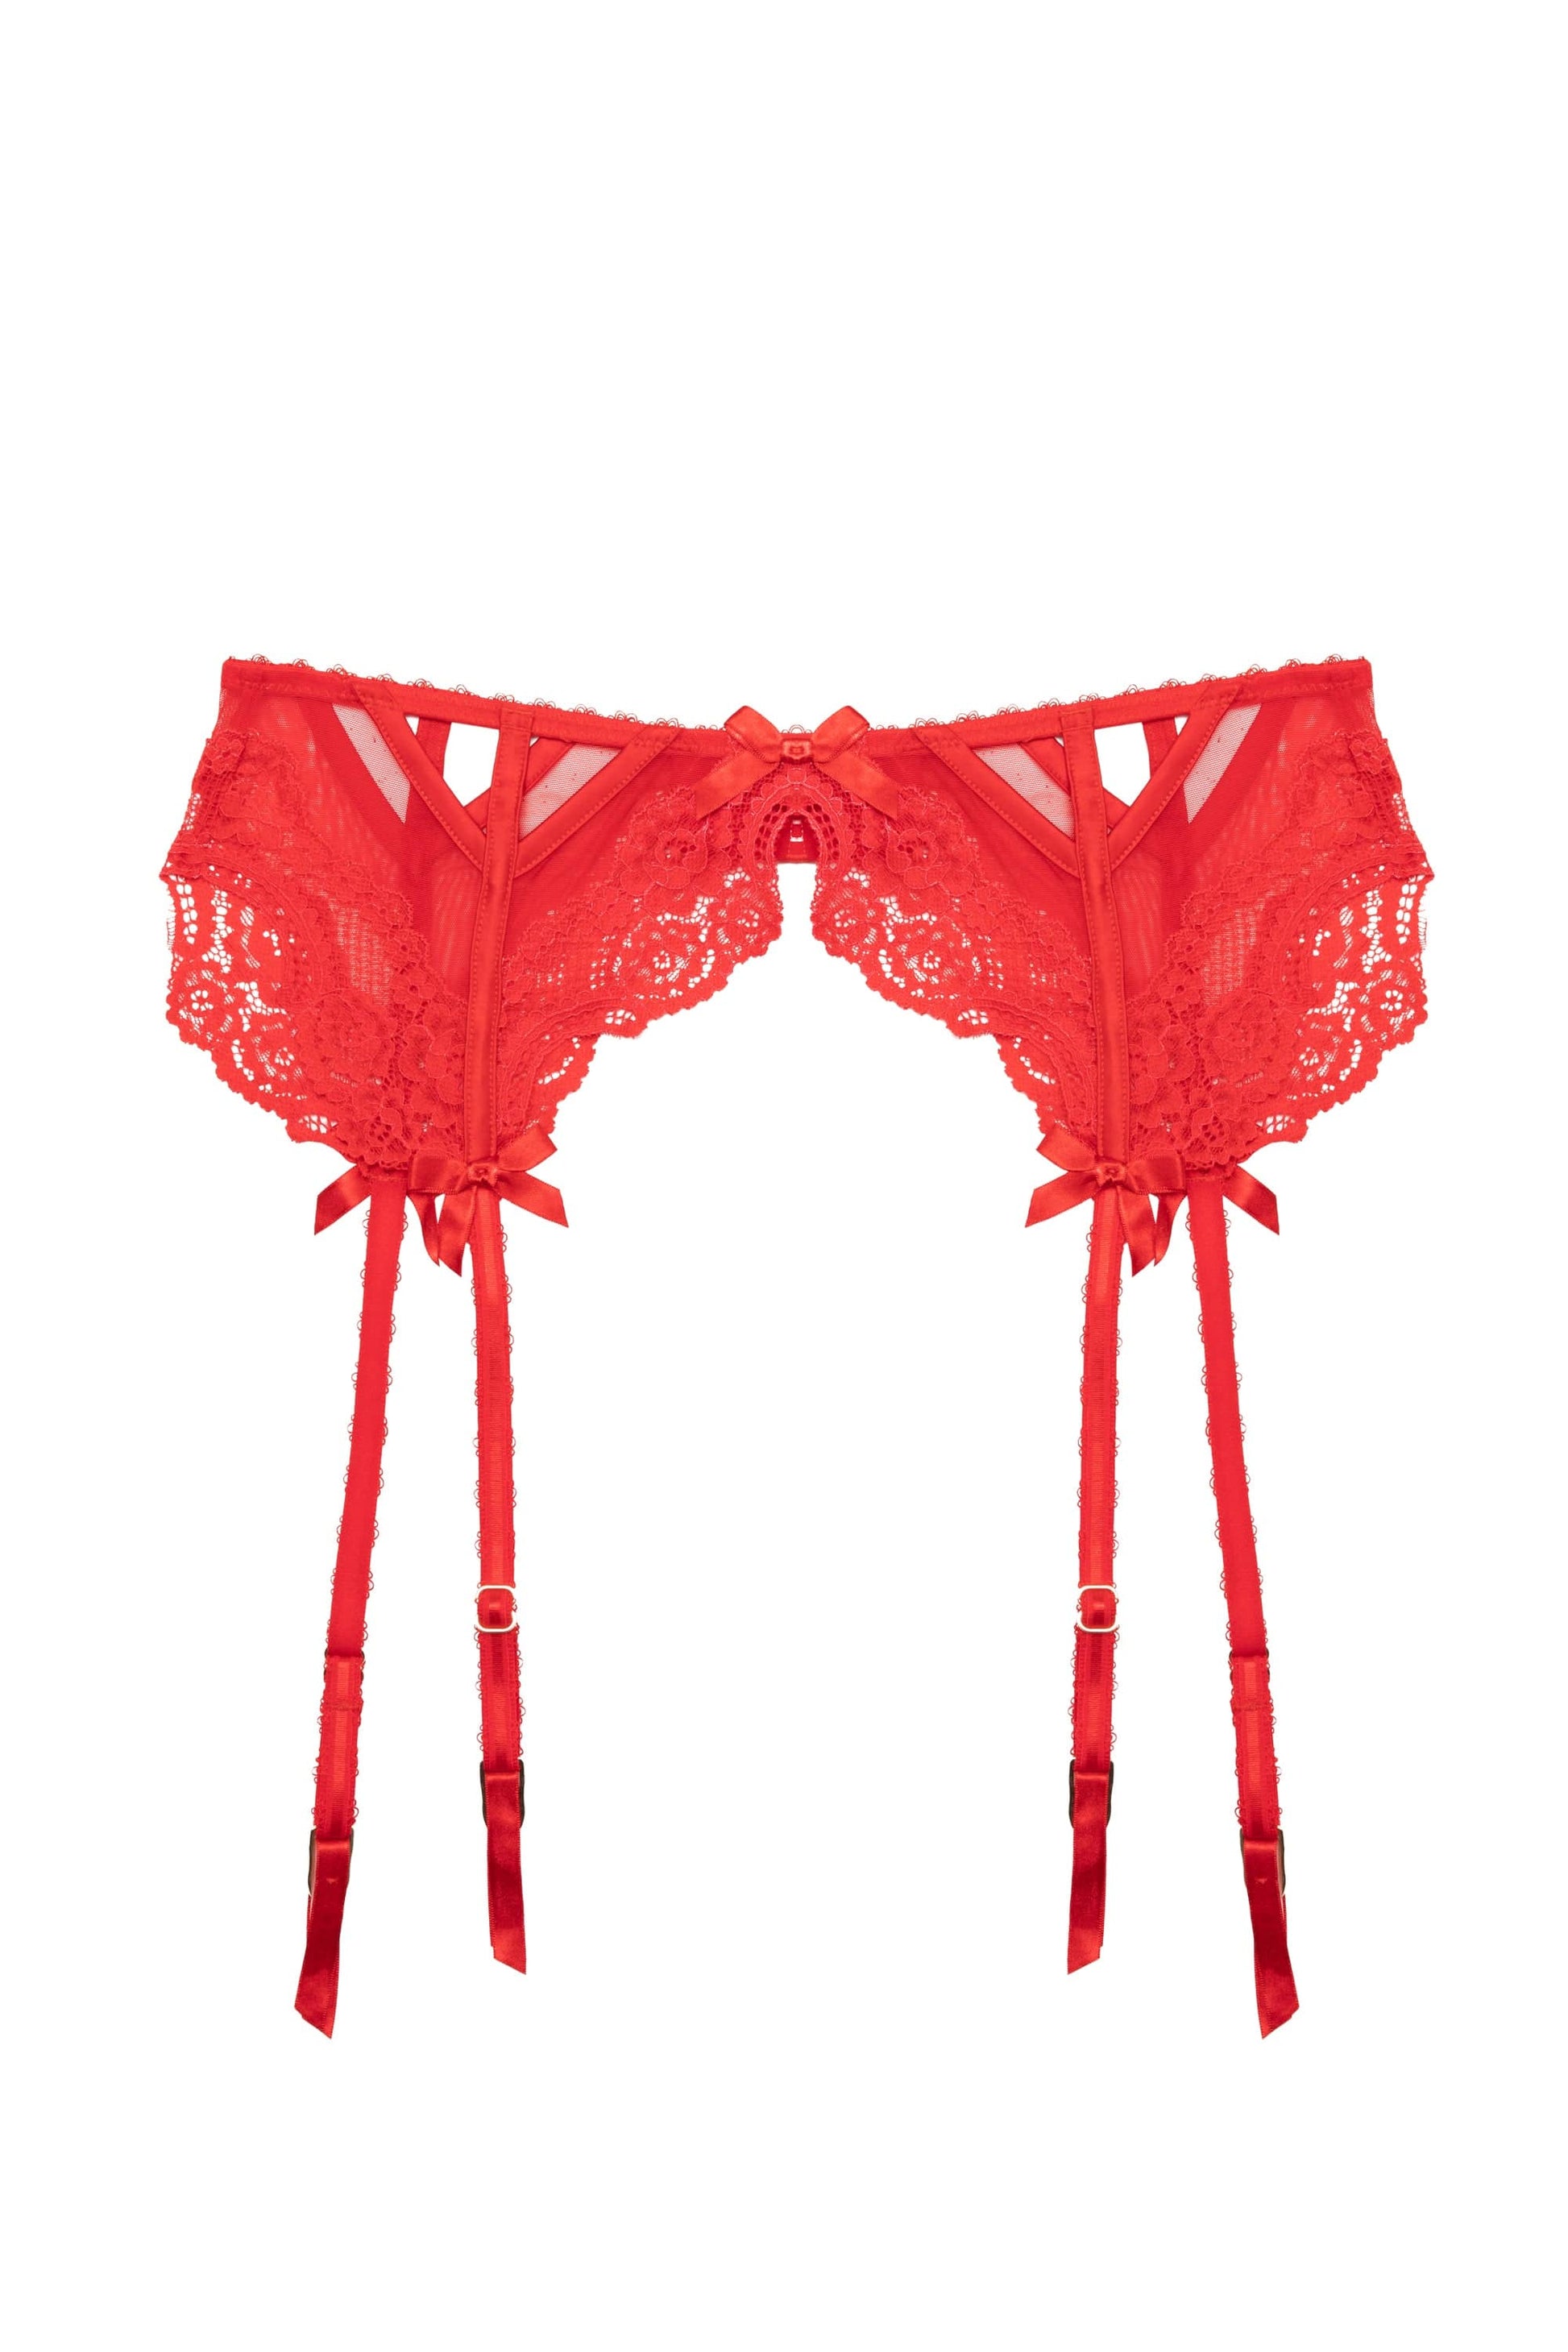 Ira Soleil Red Lace Pattern Lingerie Set